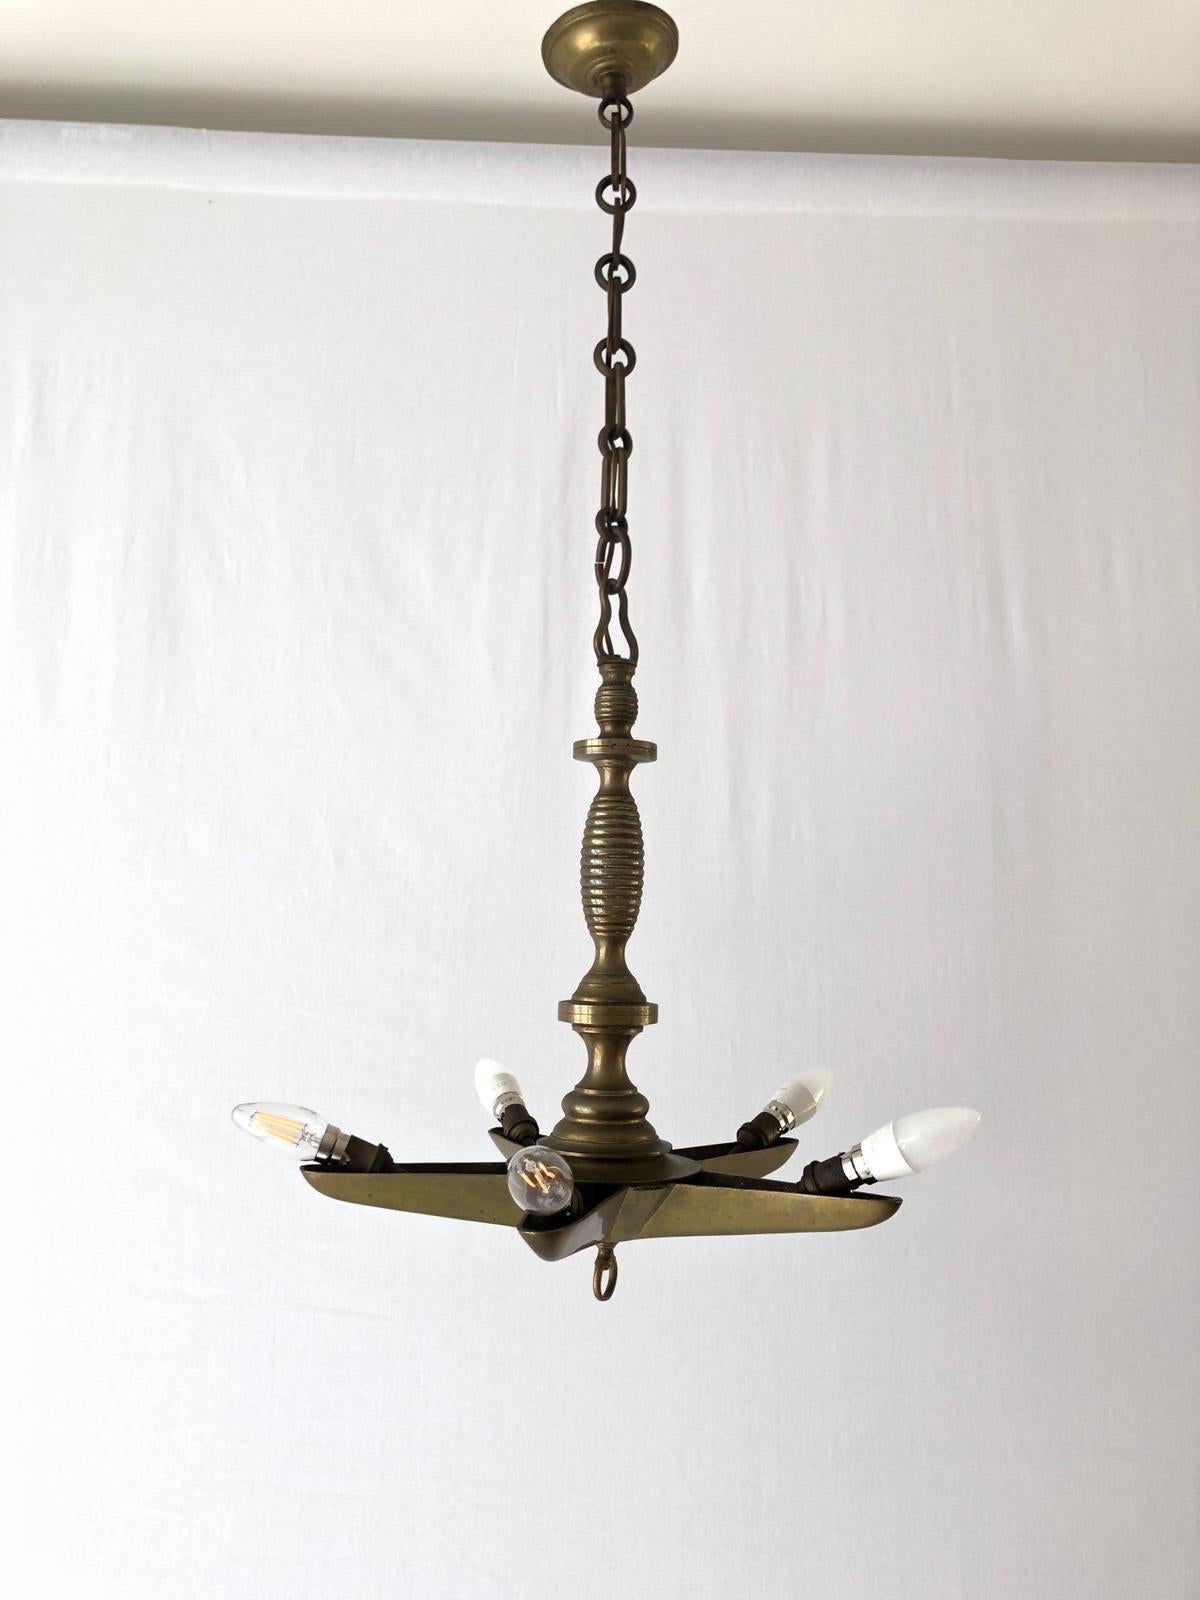 Unique Full Brass Star Design Church Chandelier, 1940s, France

Lampshade is in very good vintage condition.
No crack, no missed piece.
Original canopy.

This lamp works with 5x French B22 light bulbs
Wired and suitable to use with 220V and 110V for